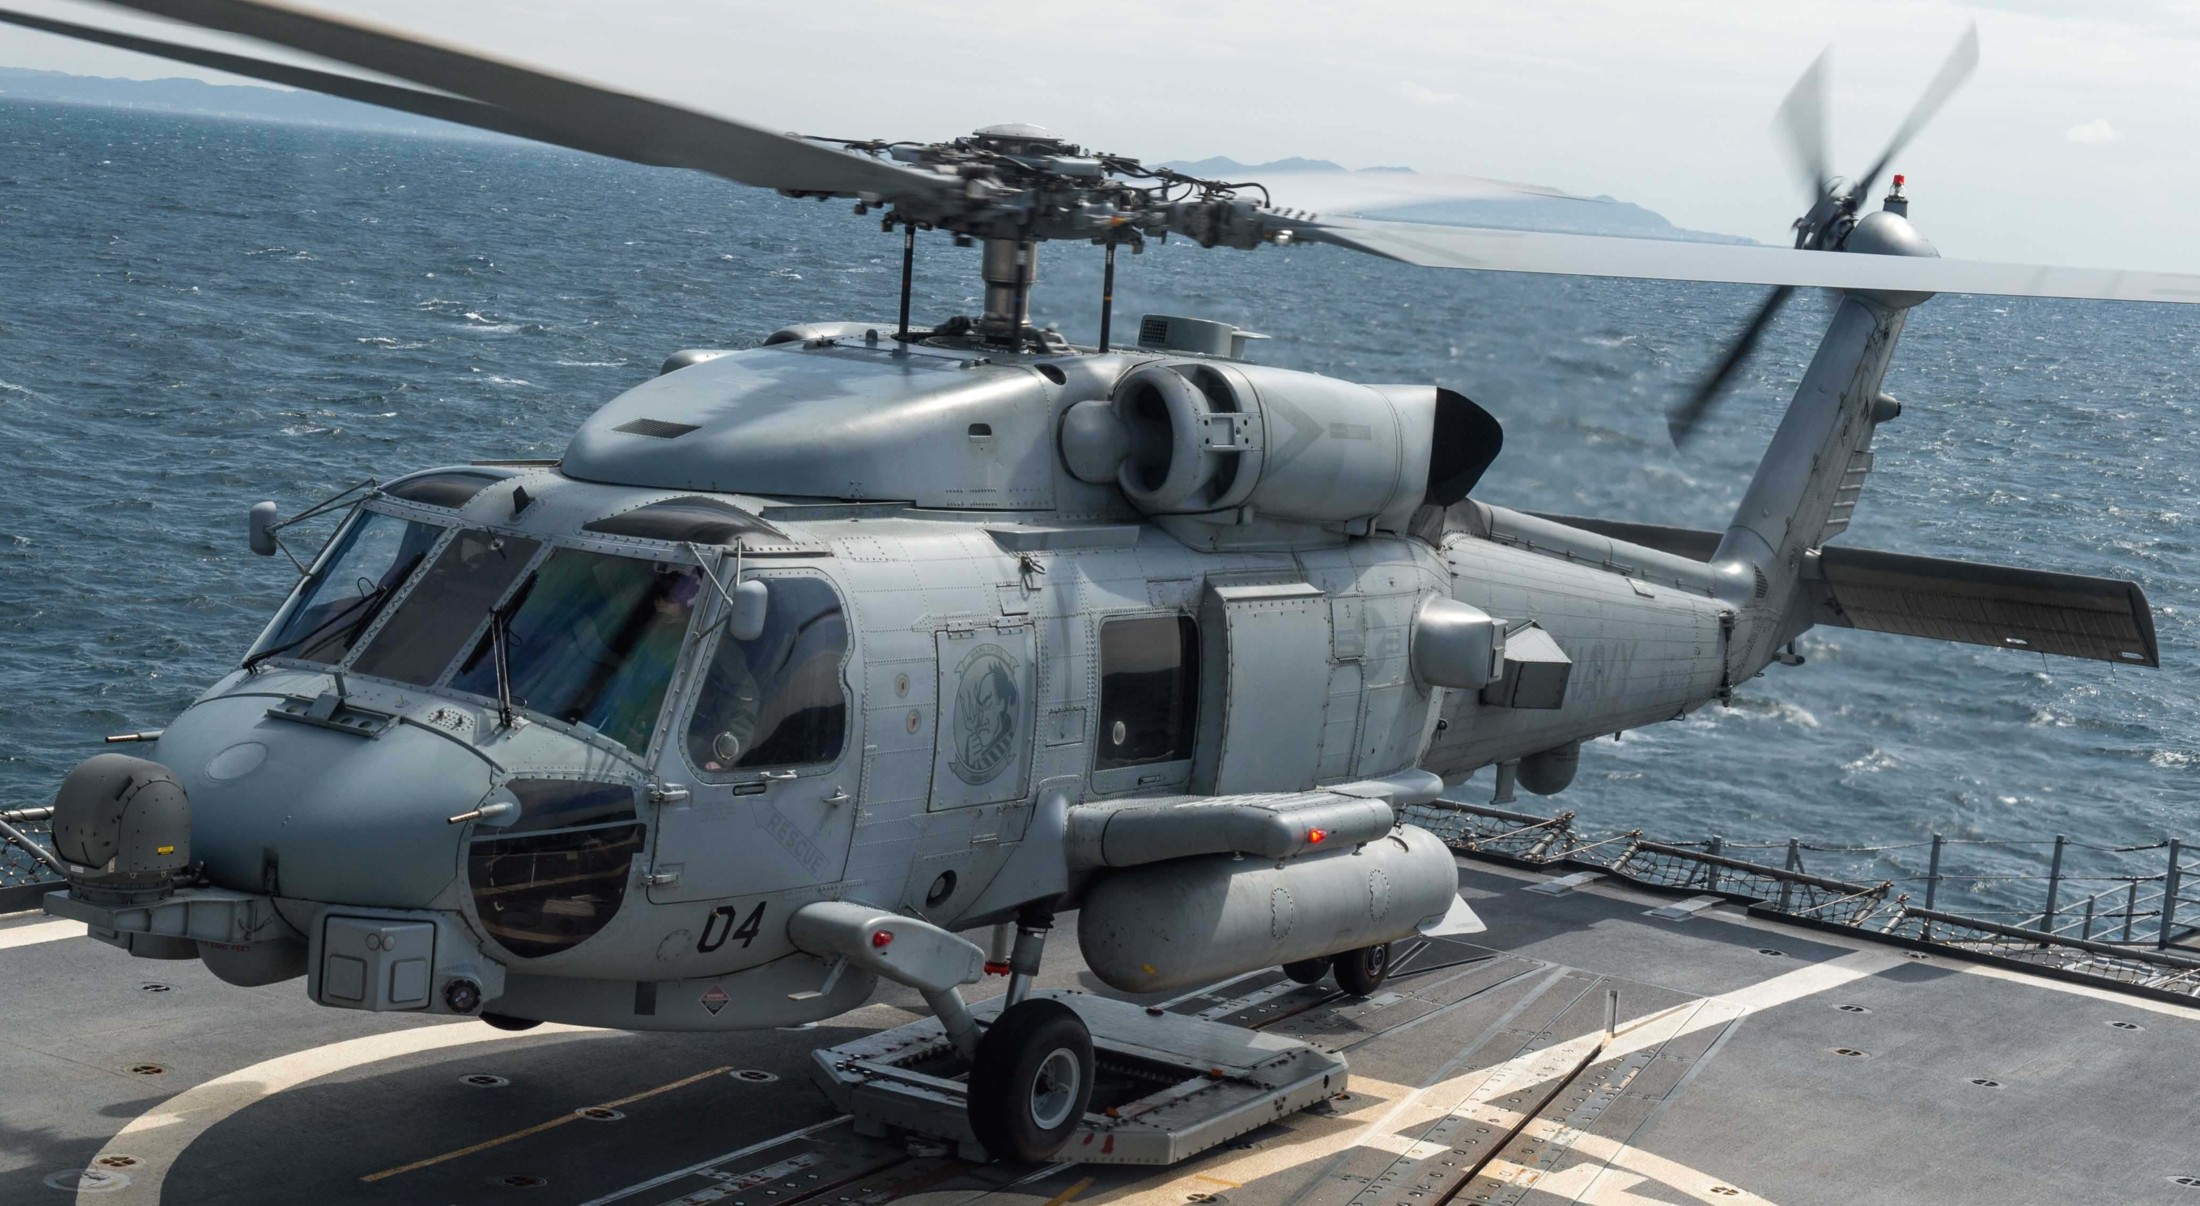 hsm-51 warlords helicopter maritime strike squadron mh-60r seahawk navy 2015 63